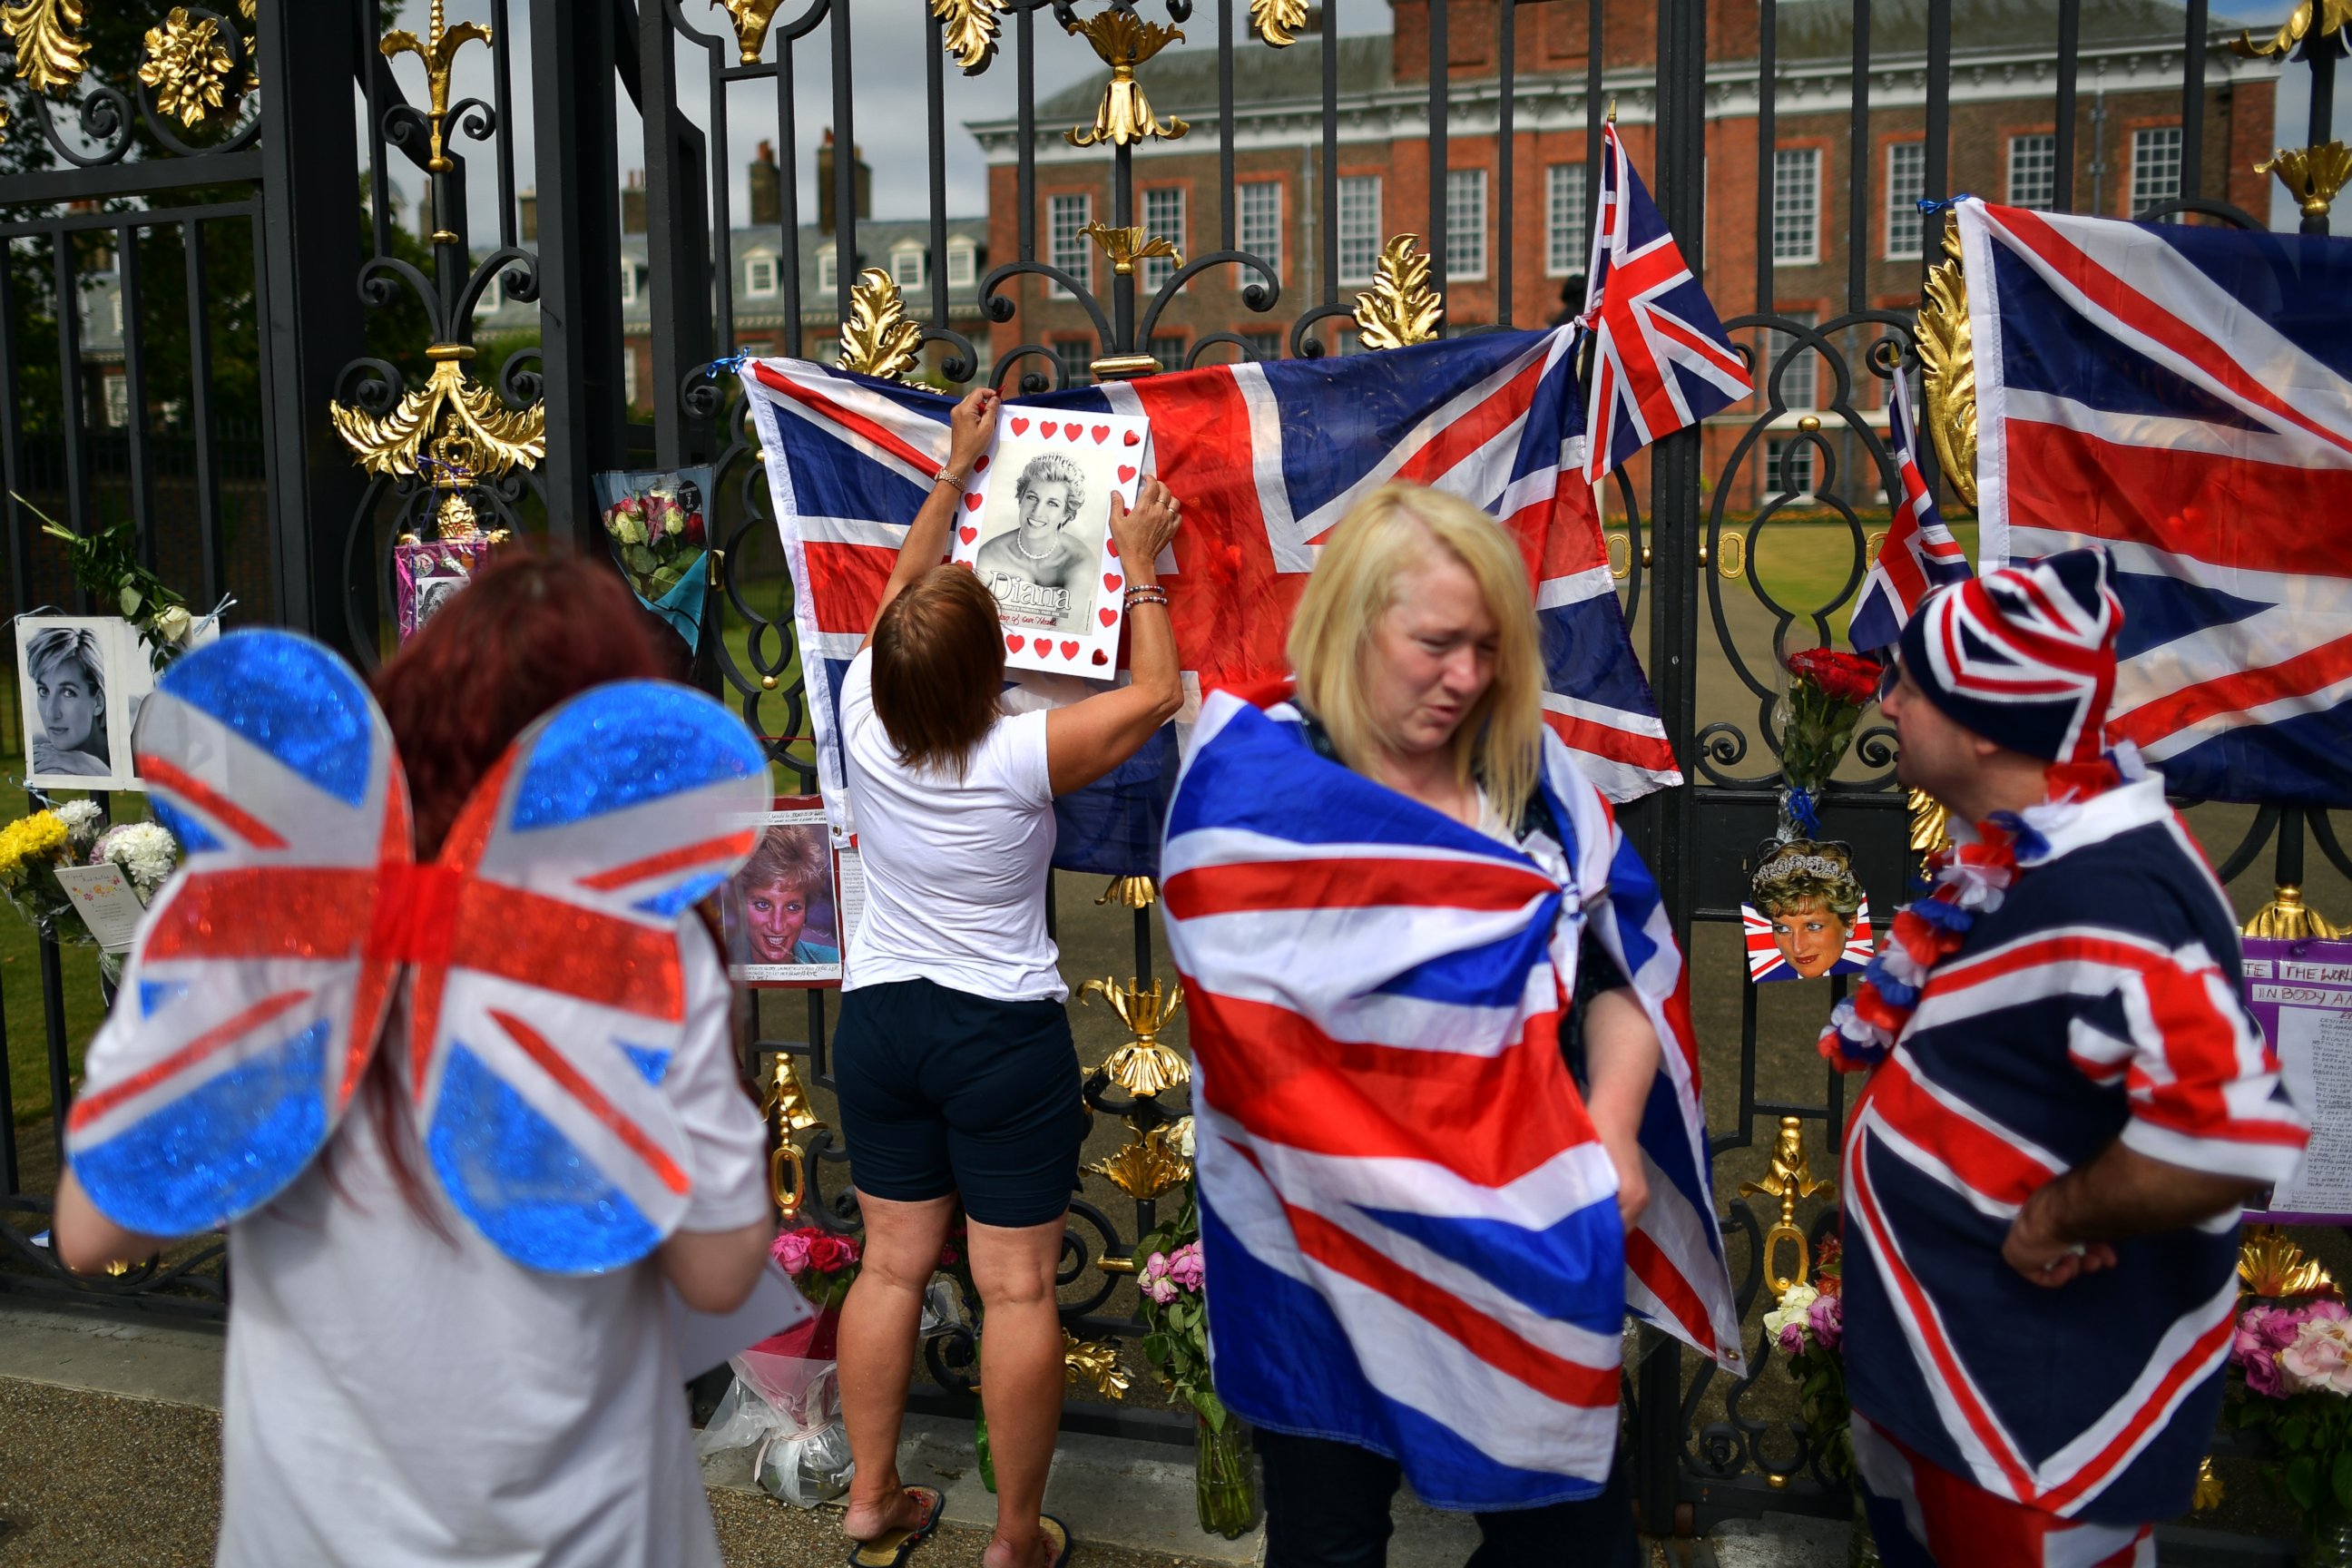 PHOTO: A royal supporter hangs a tribute to Princess Diana on a gate to Kensington Palace on Au. 31, 2016 in London, England.